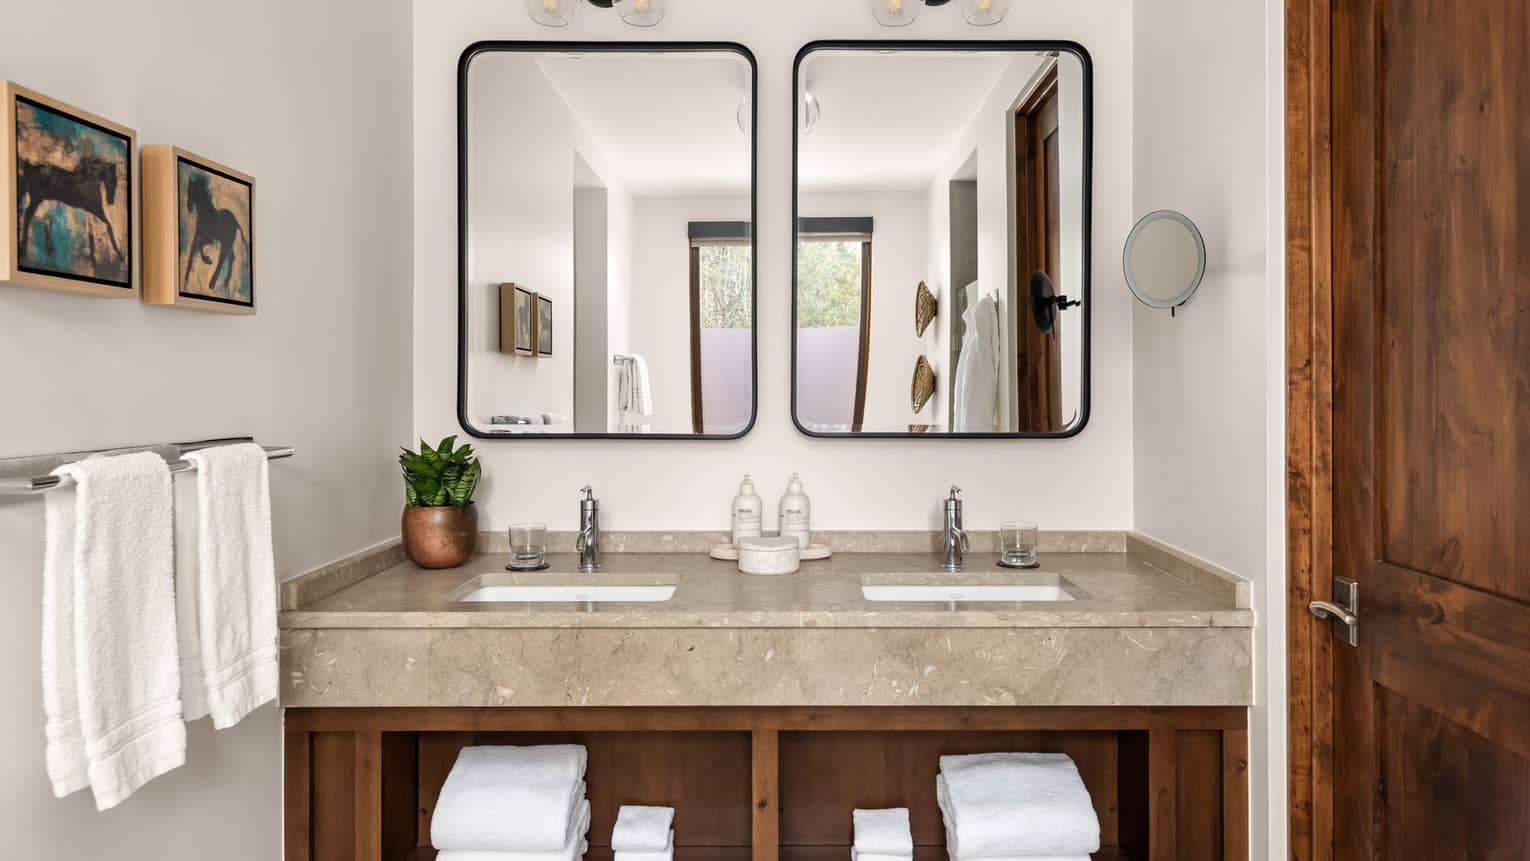 Bathroom with double vanity, two metal-framed mirrors and wooden shelves